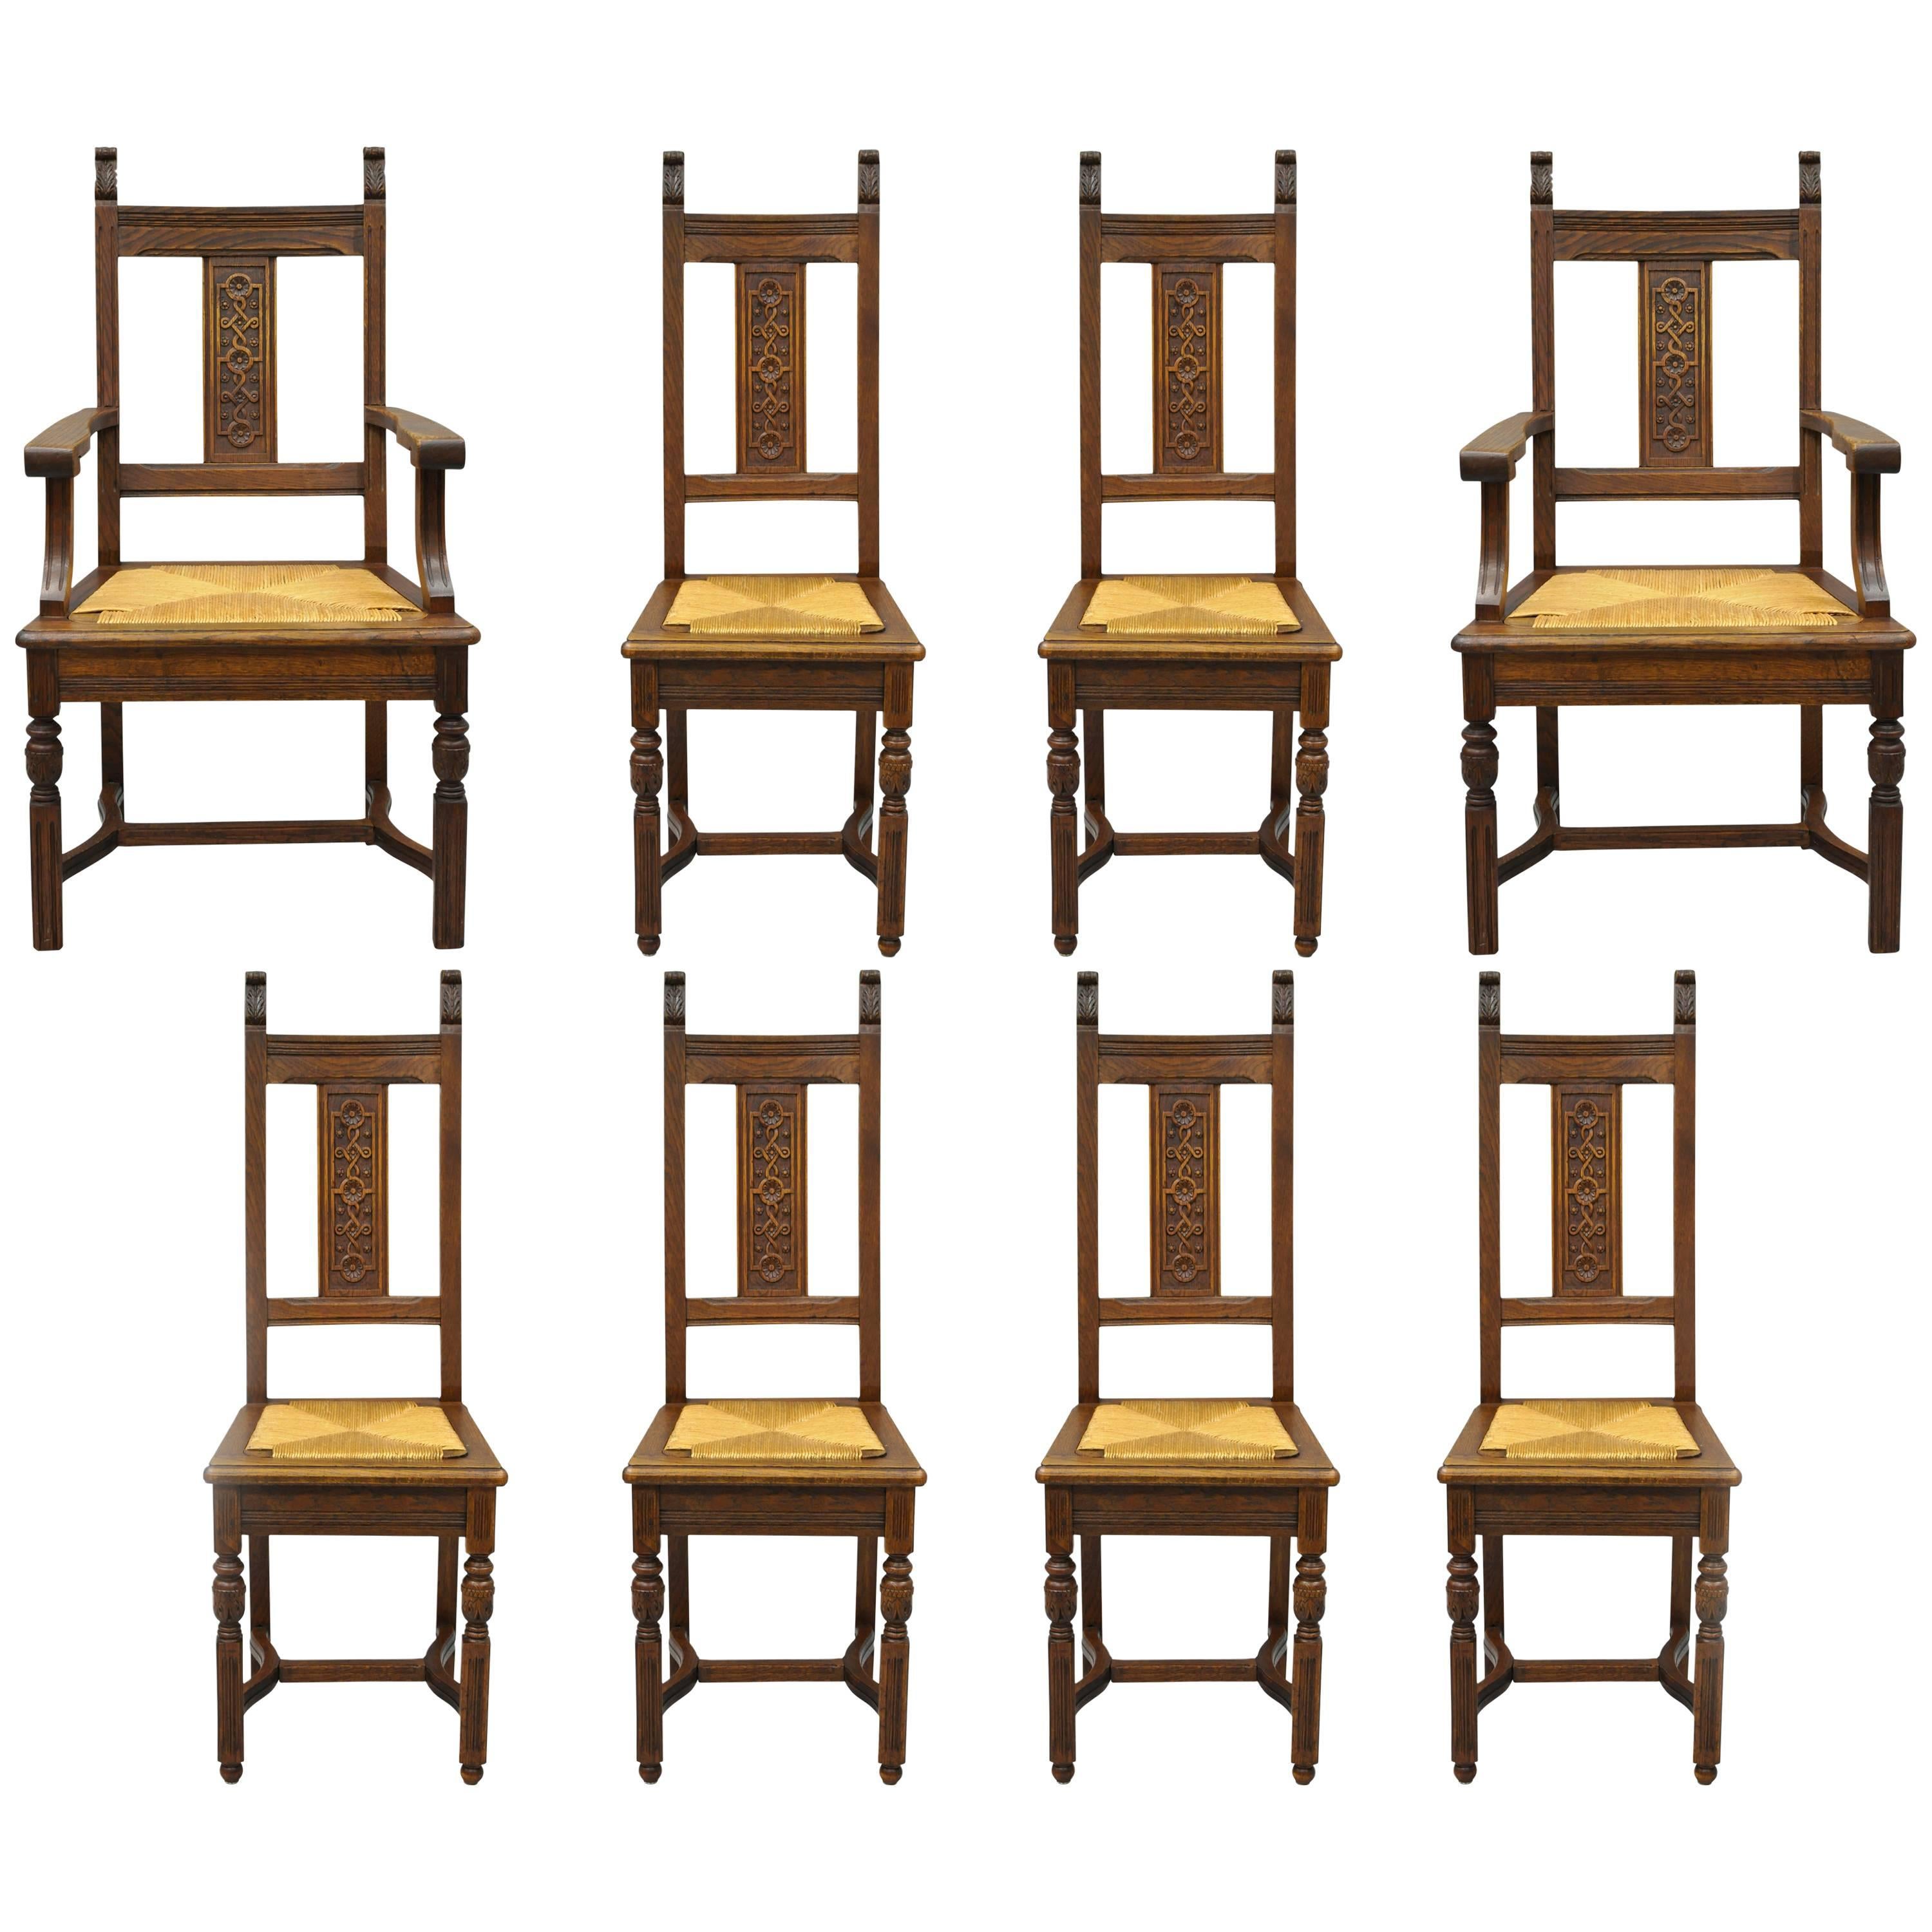 Set of 8 William & Mary Renaissance Jacobean Revival Oak Dining Chairs Rush Seat